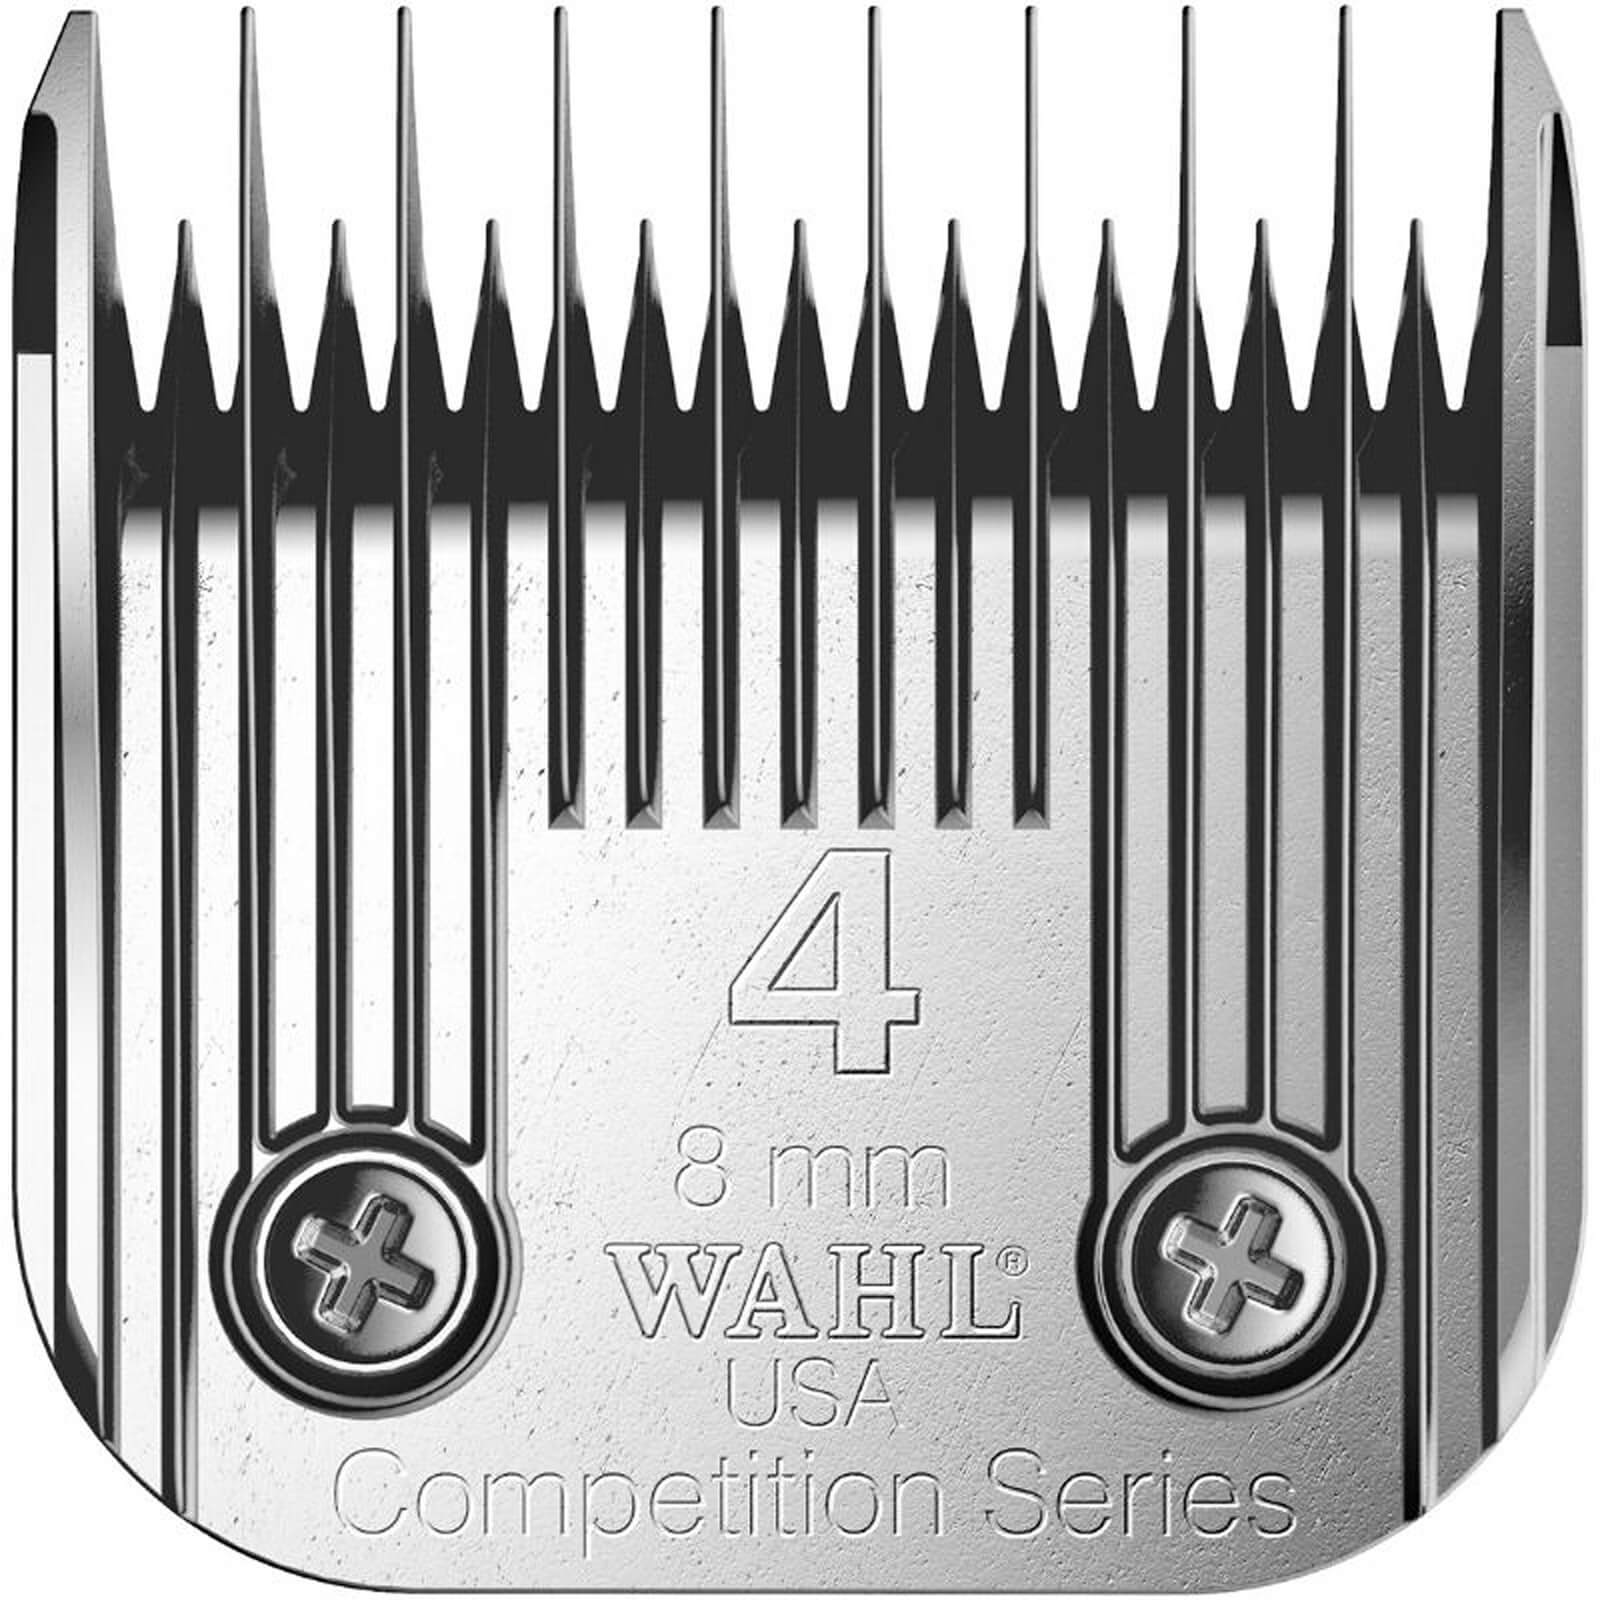 Wahl Competition Series Detachable Blade Set #4/8mm Skip Extra Coarse